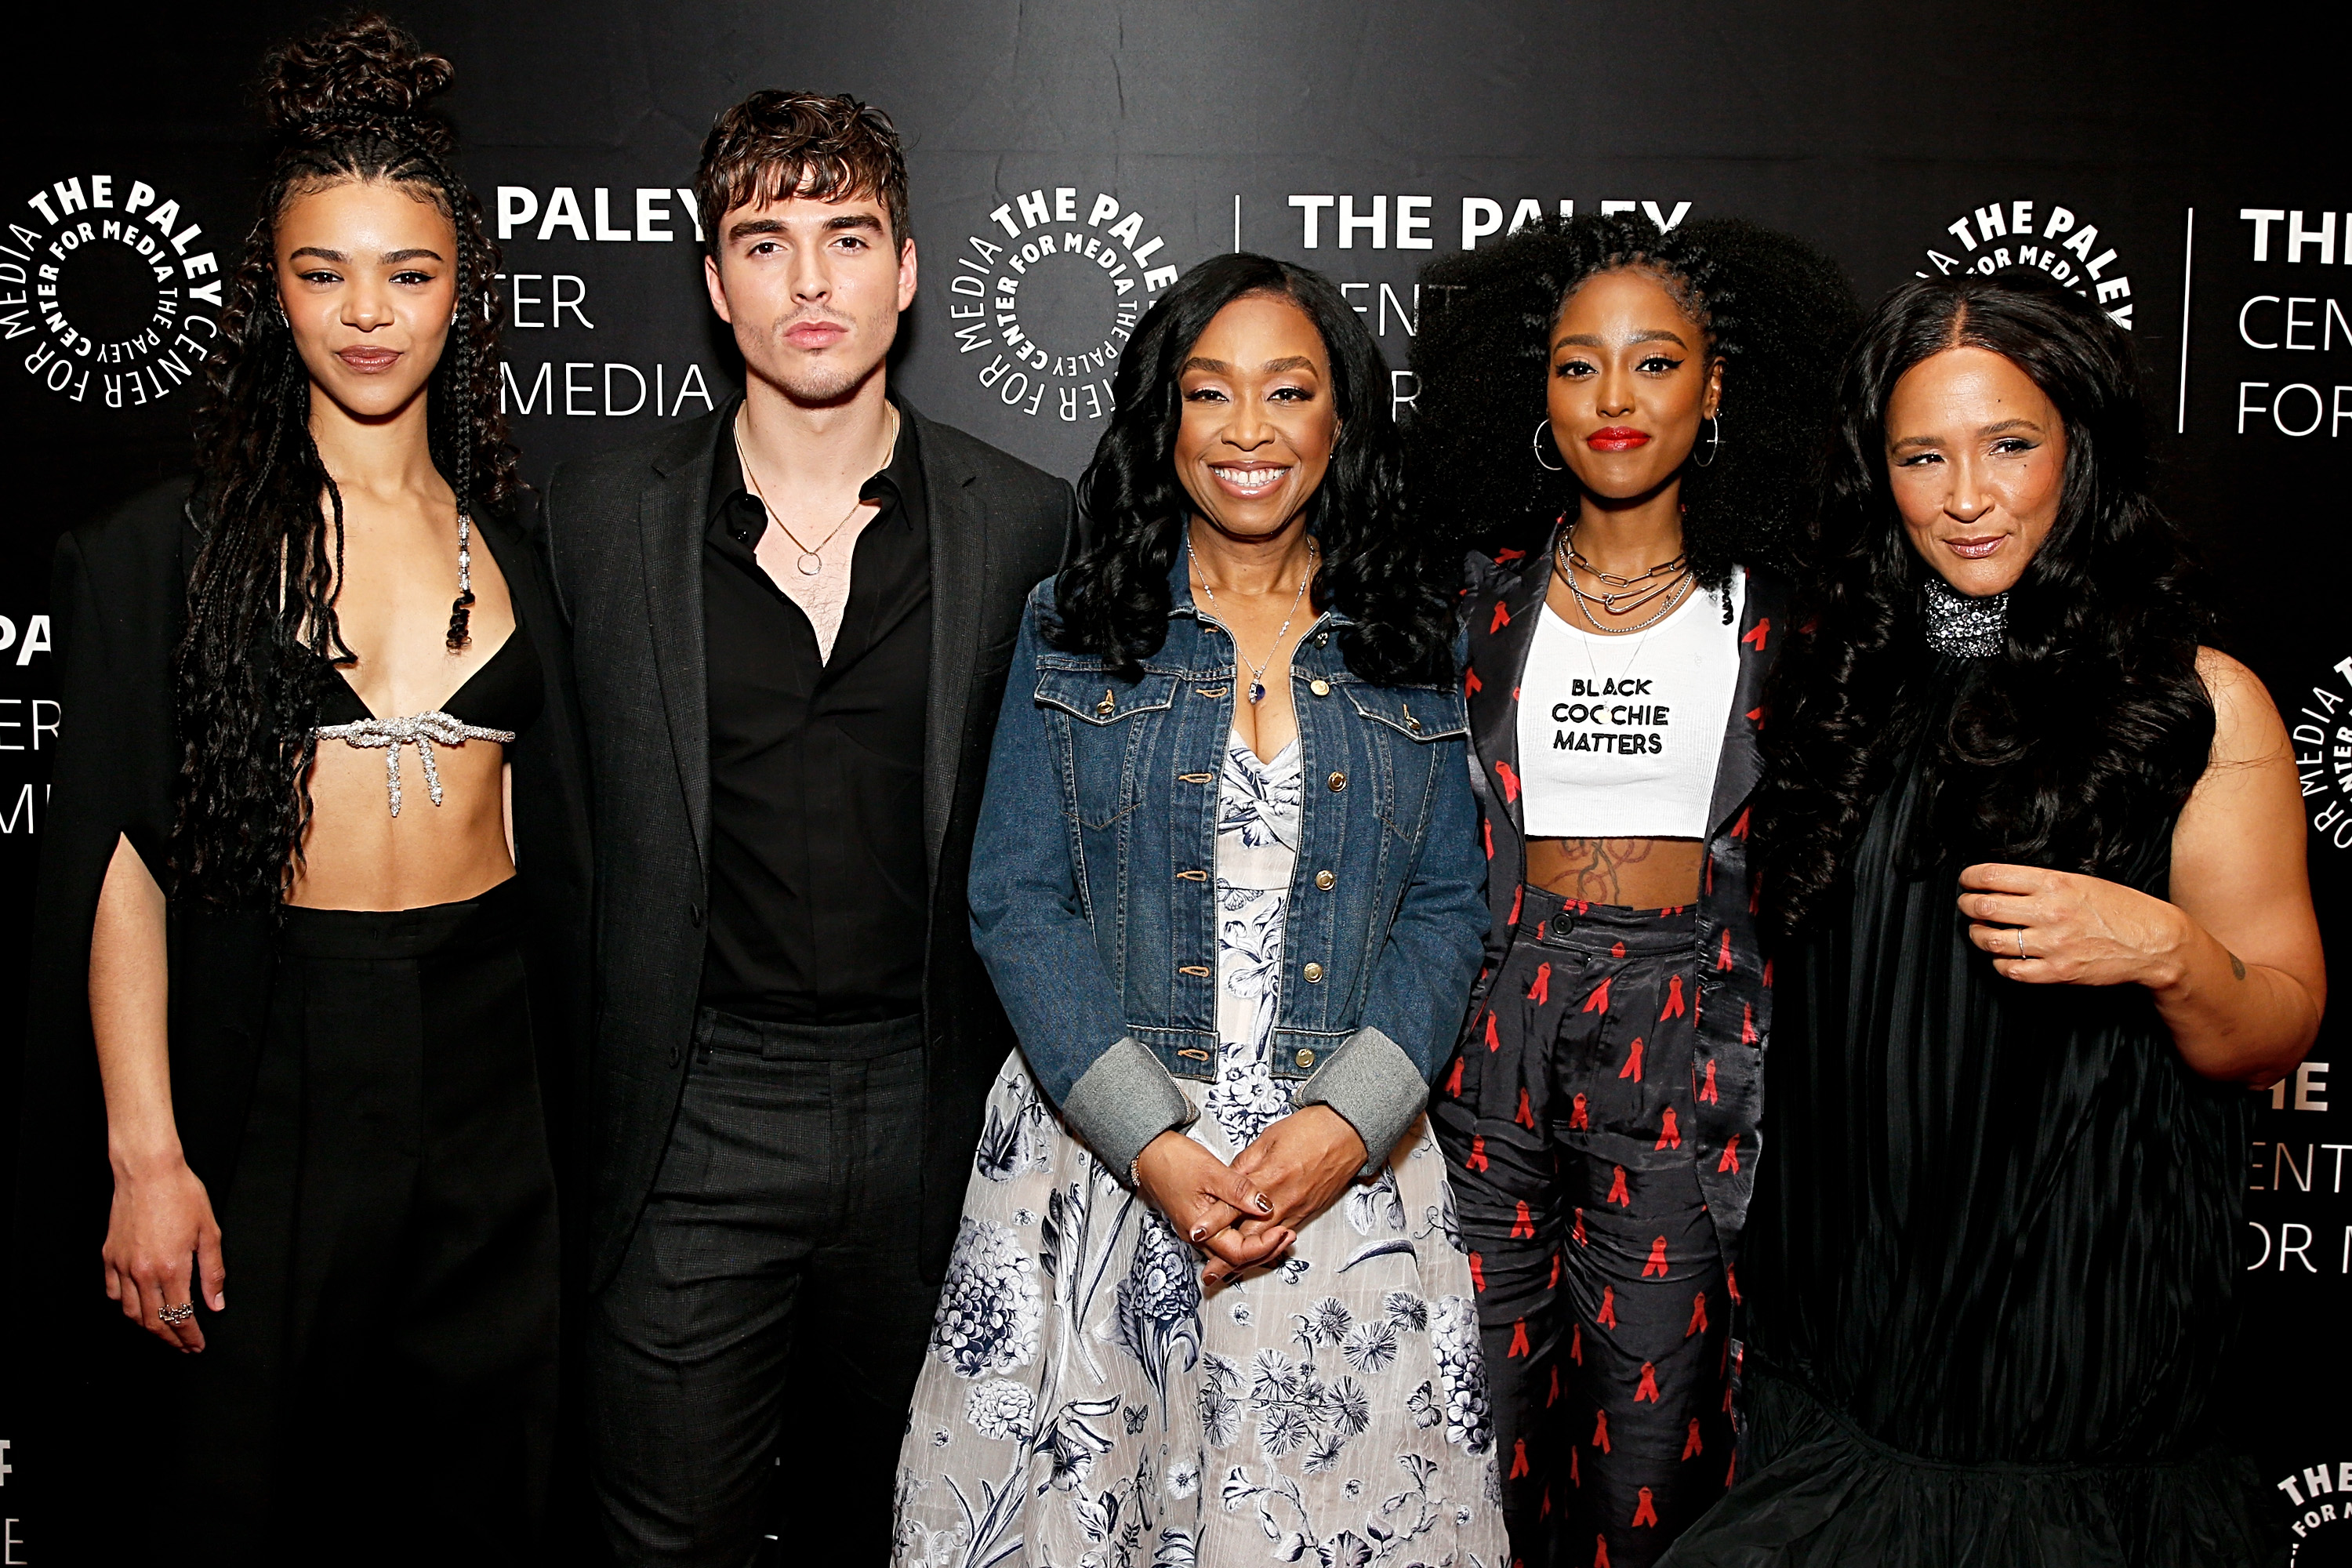 (L-R) India Amarteifio, Corey Mylchreest, Shonda Rhimes, Arsema Thomas and Golda Rosheuvel attend the celebrations of "Queen Charlotte: A Bridgerton Story" at The Paley Museum, on May 04, 2023, in New York City. | Source: Getty Images